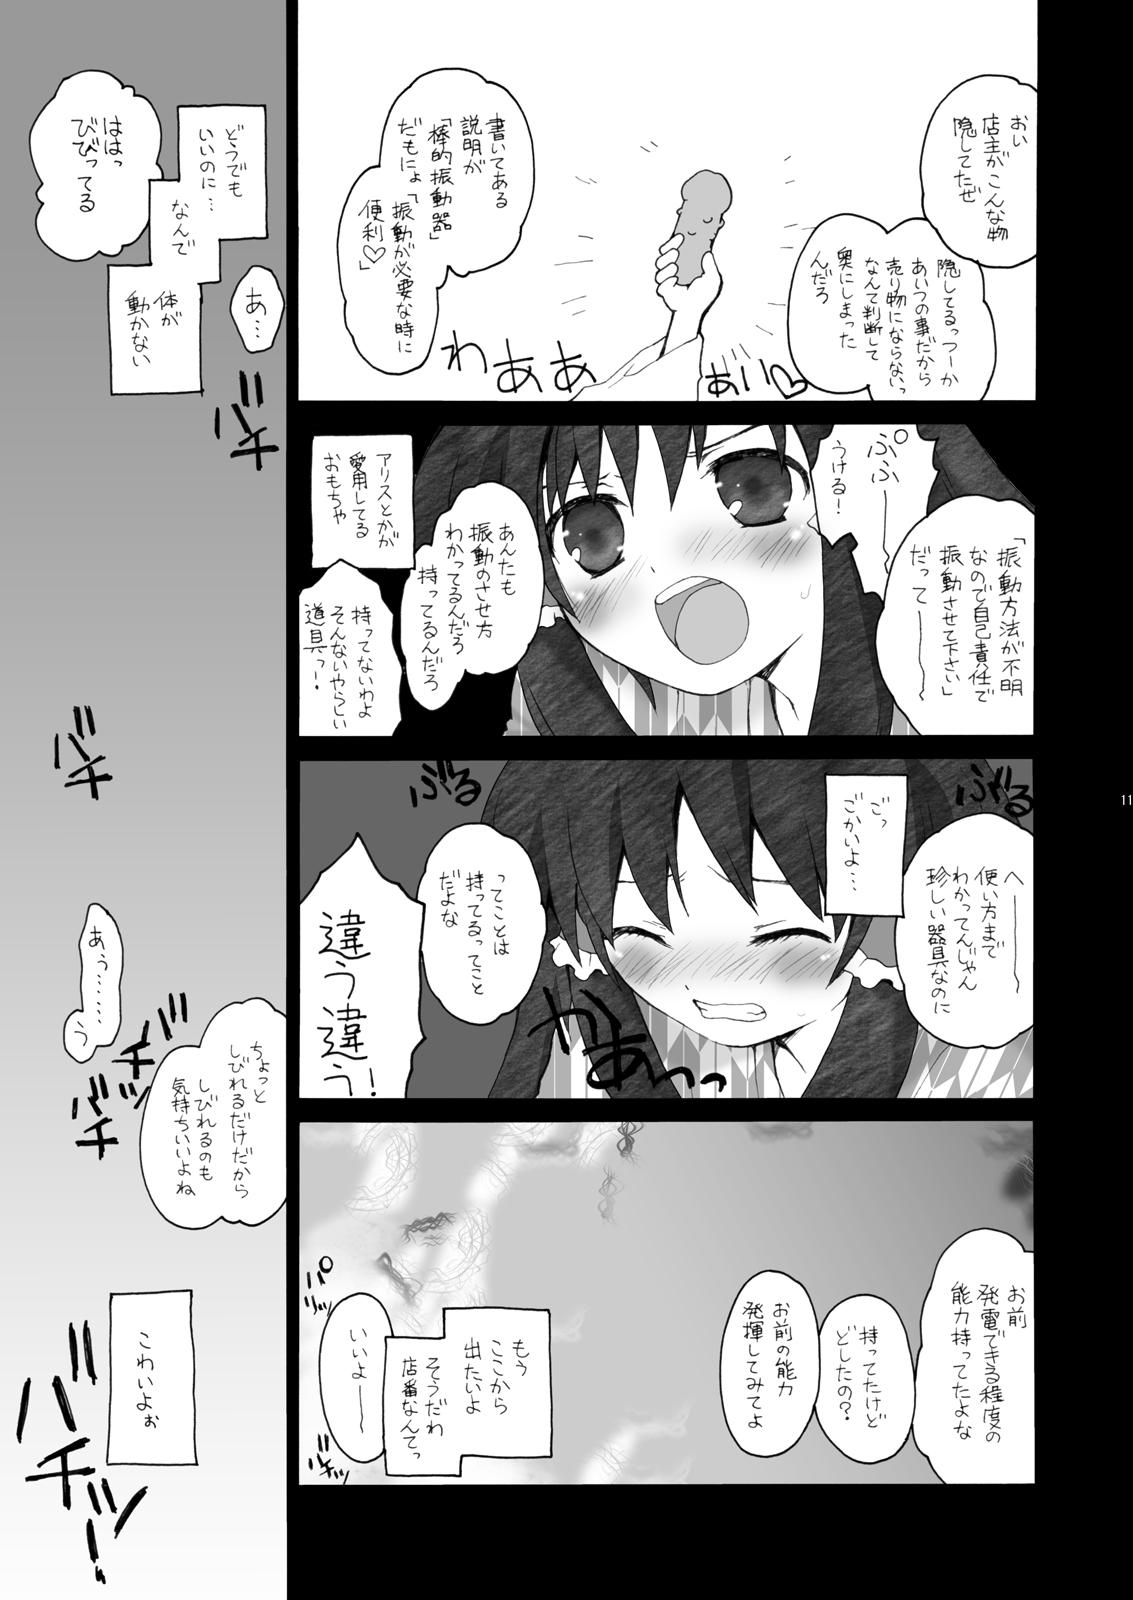 Erotica けしからん娘達～あるお店の一日総集編～ - Touhou project Perfect Porn - Page 9